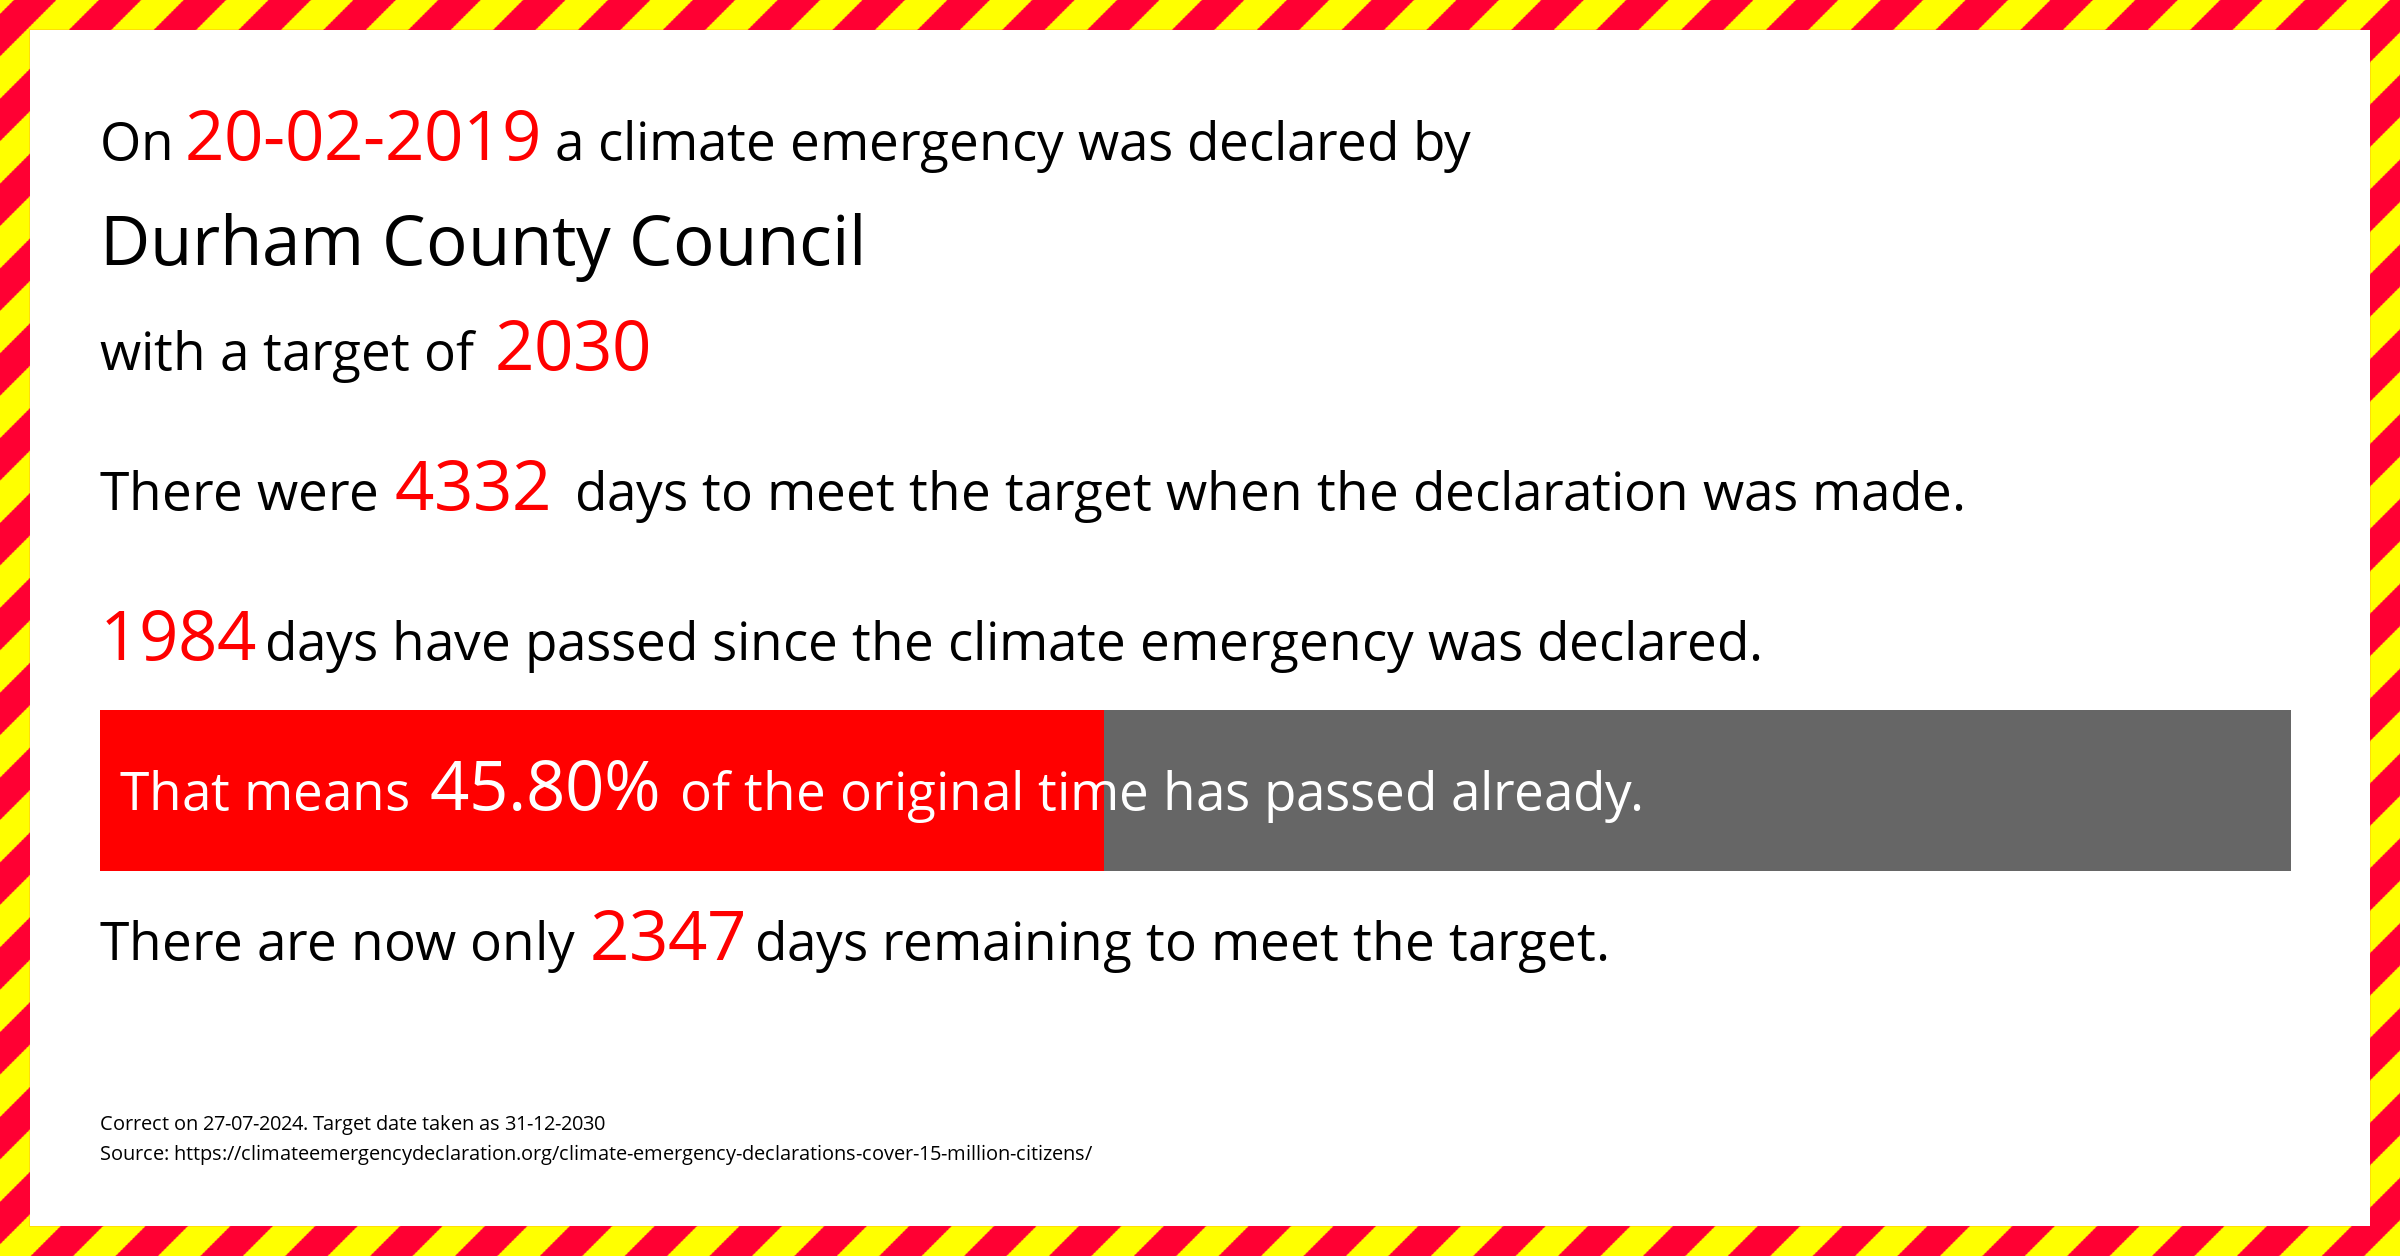 Durham County Council declared a Climate emergency on Wednesday 20th February 2019, with a target of 2030.